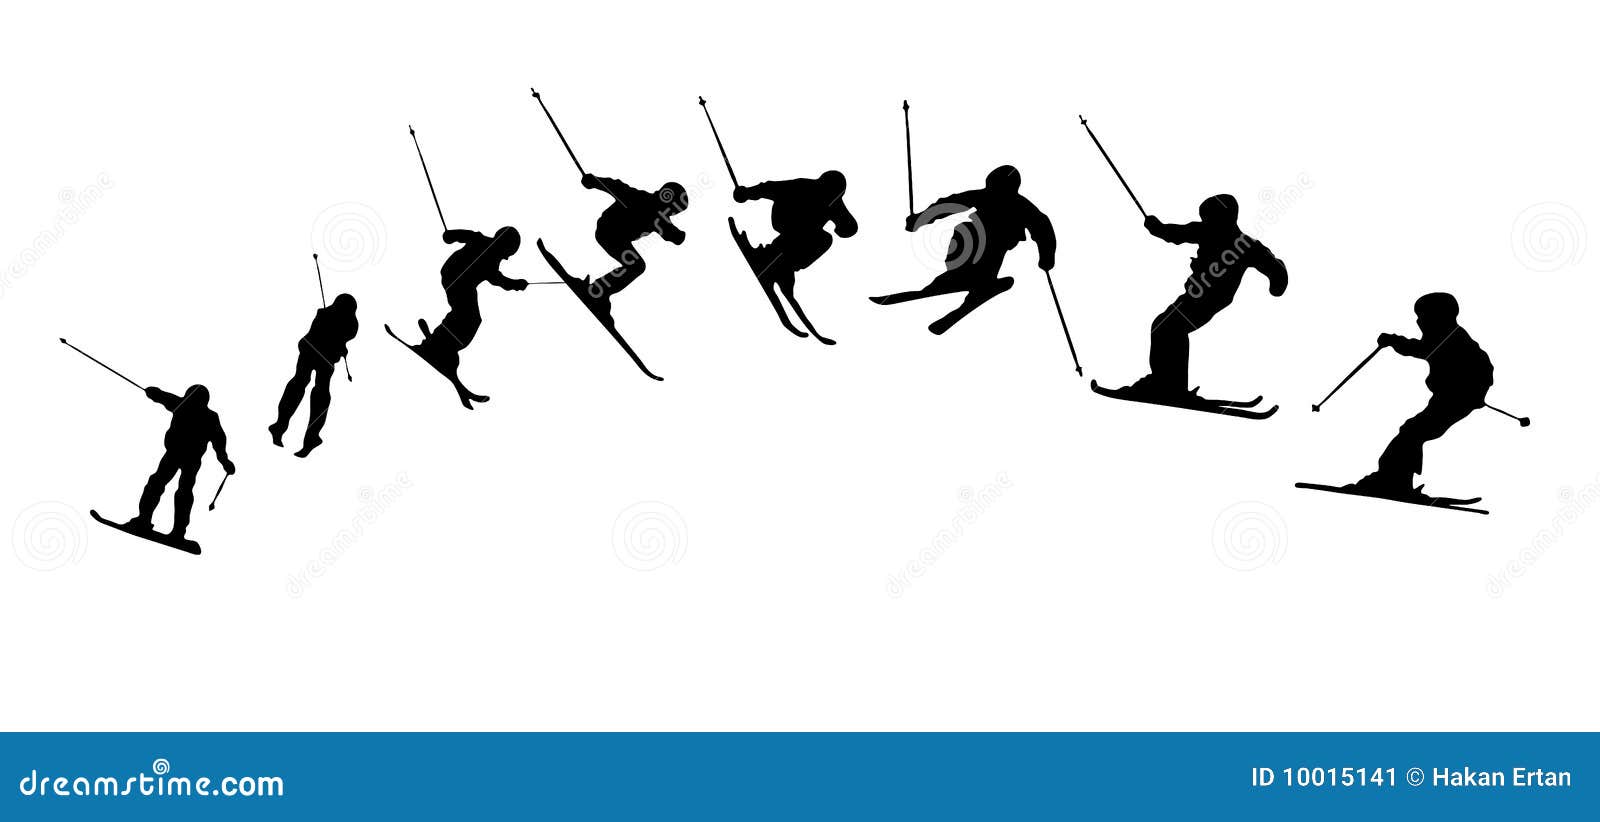 Skiing Sequence Silhouettes Stock Vector Illustration of